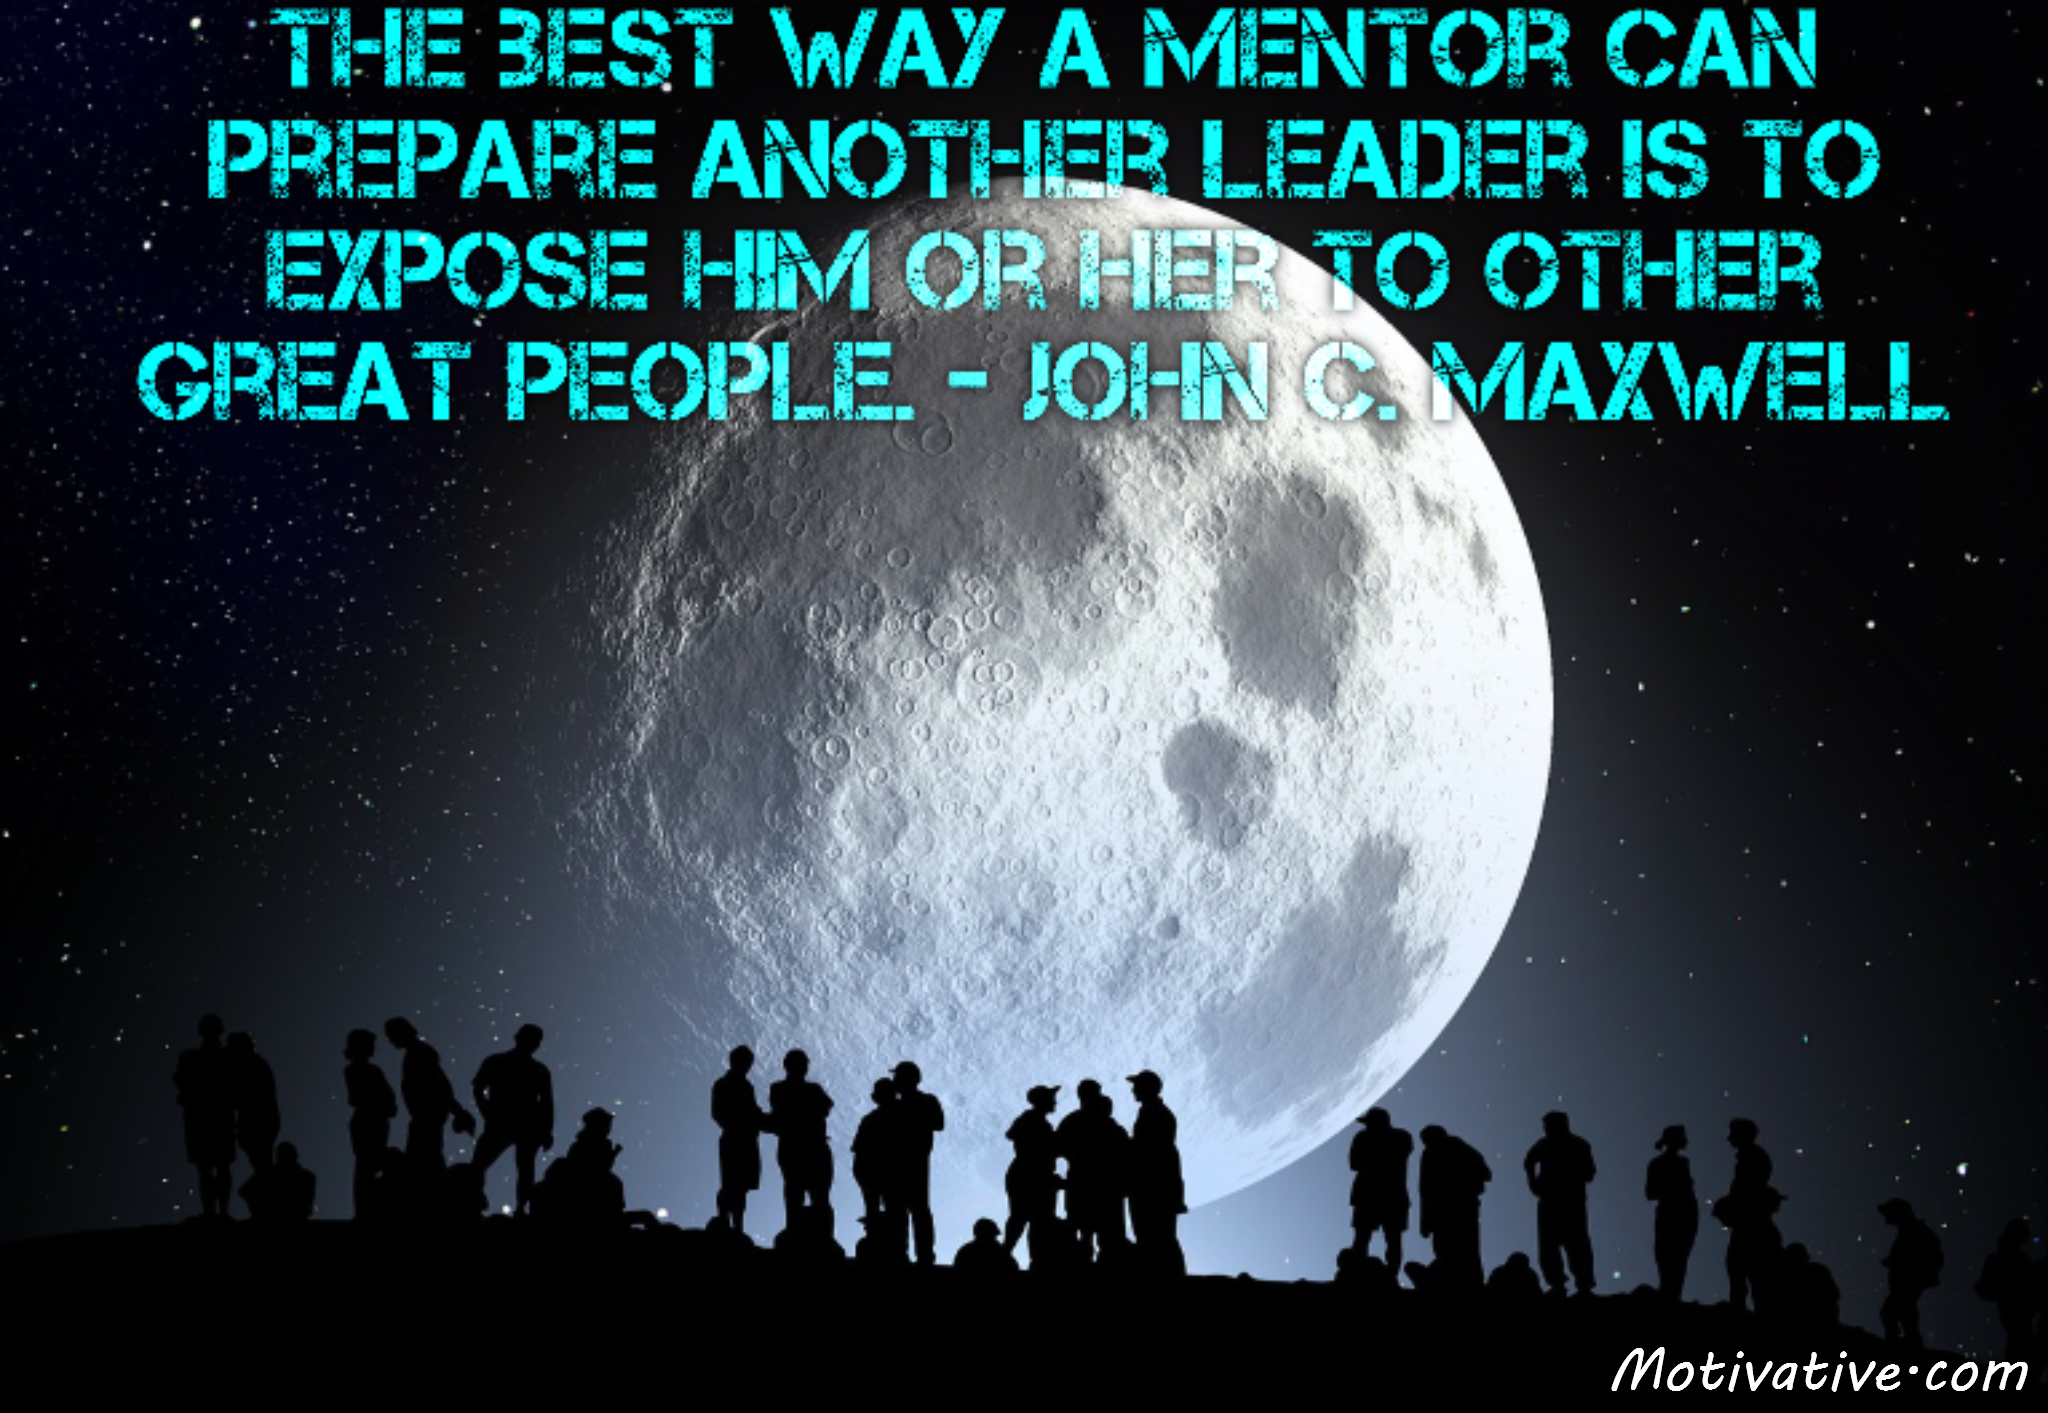 The best way a mentor can prepare another leader is to expose him or her to other great people. – John C. Maxwell